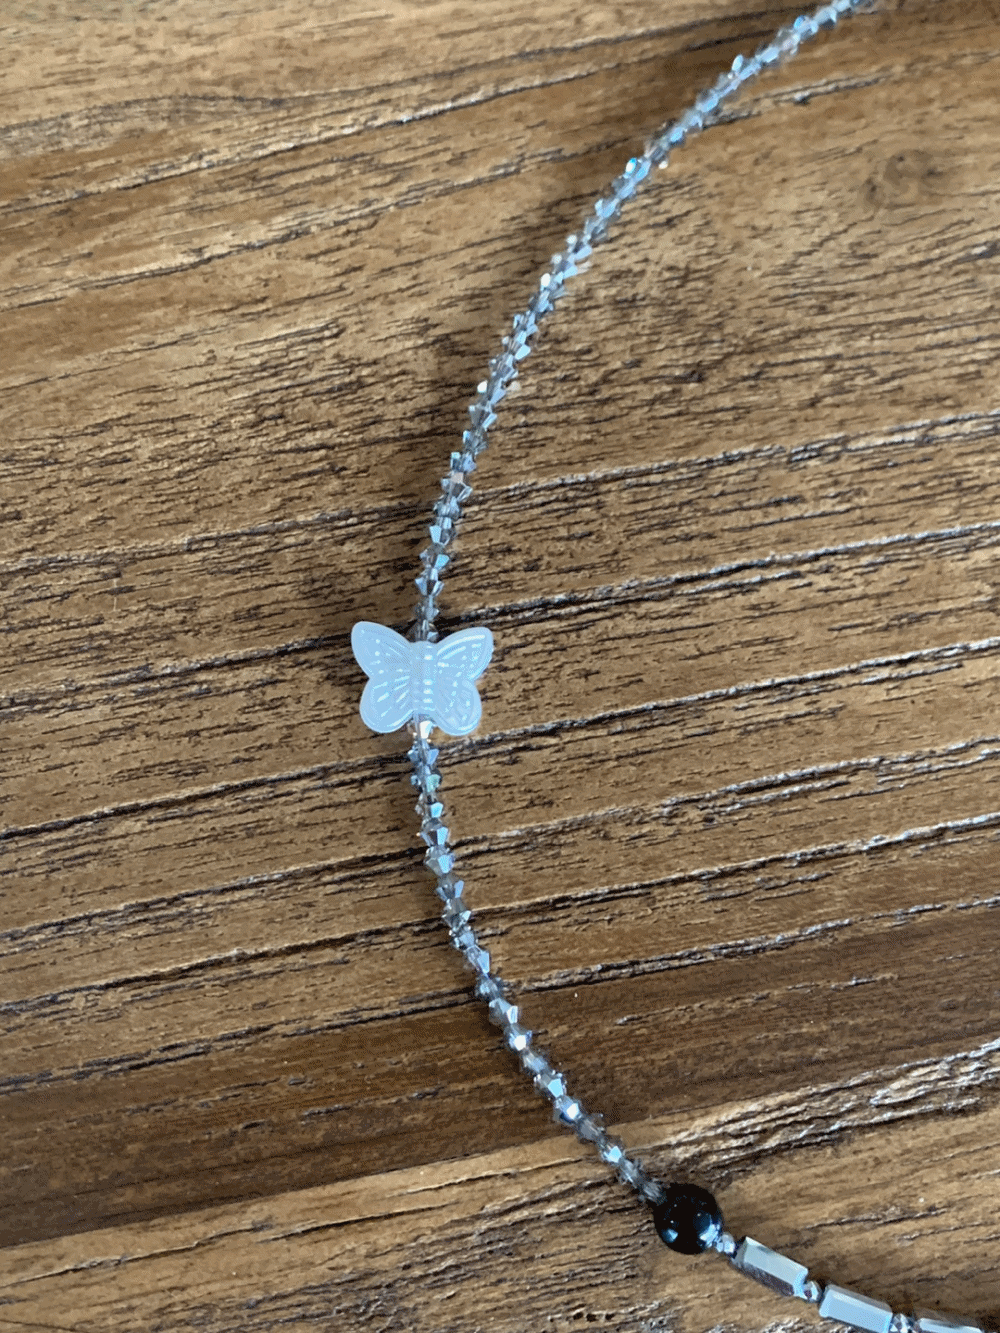 [Acc] Hana butterfly necklace / one color